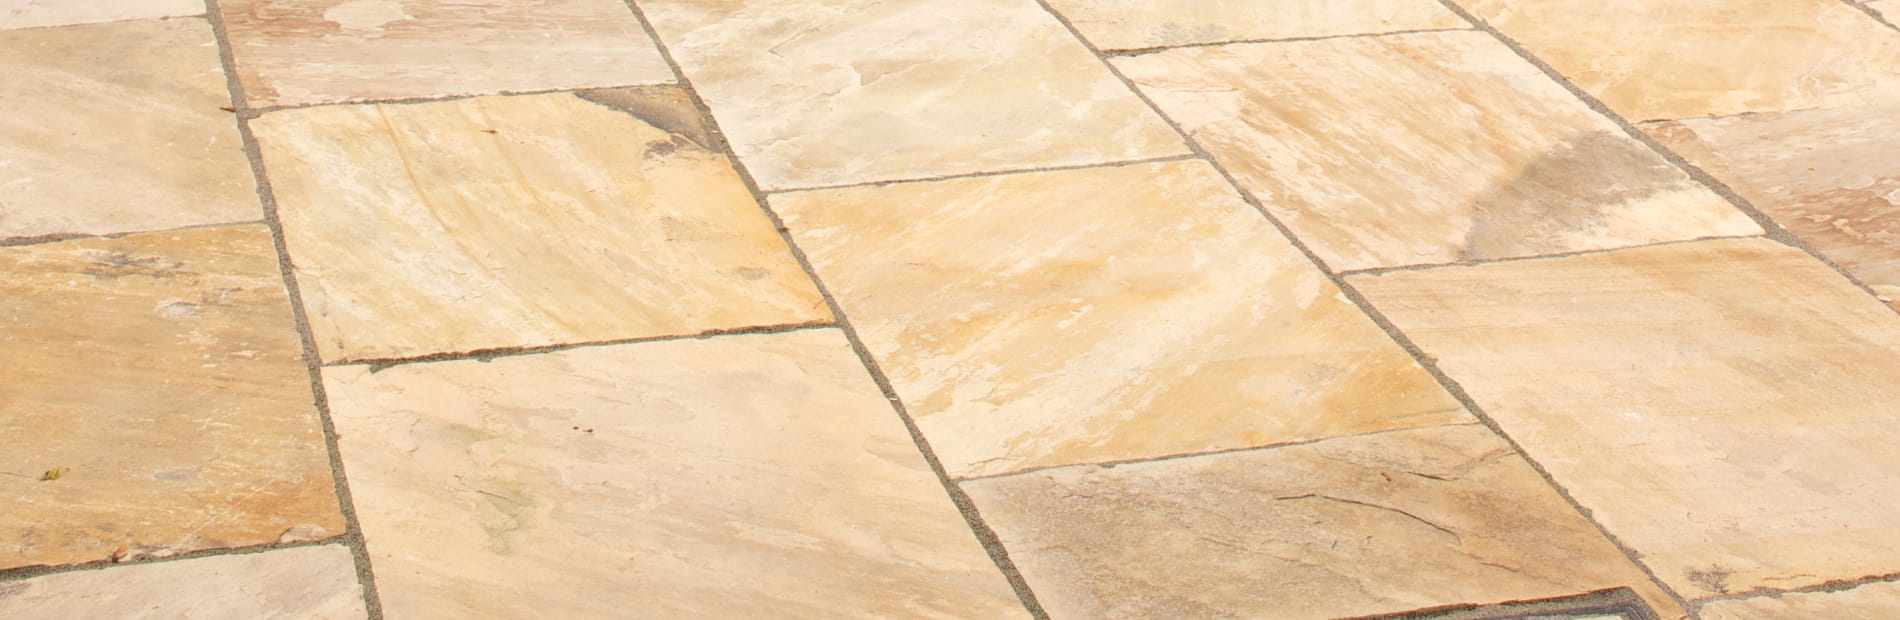 how to clean indian sandstone paving